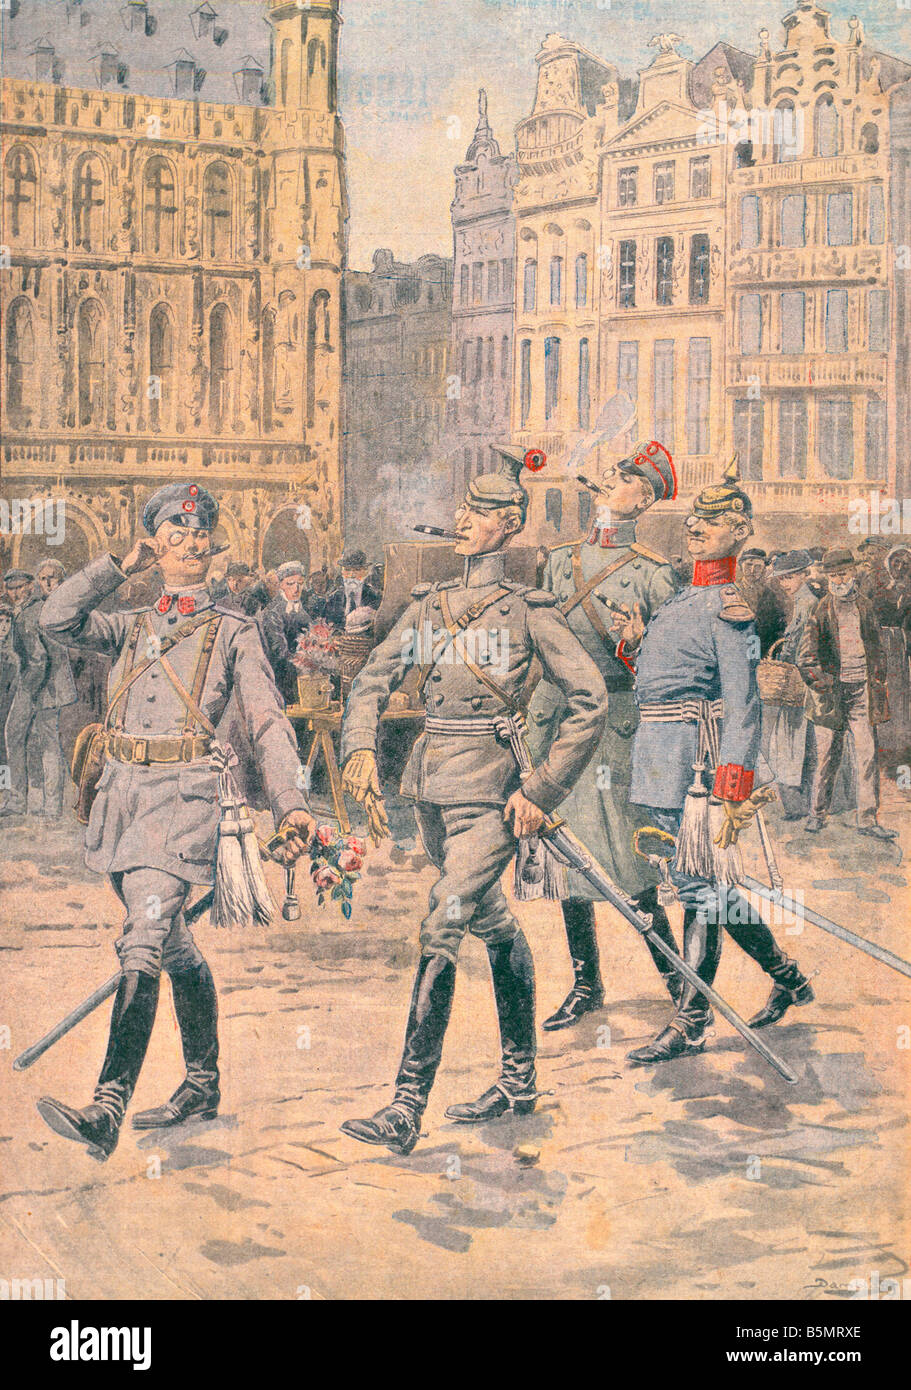 9BE 1916 0 0 A1 E Ger officers in Brussels 1916 Pet Journ World War 1 Belgium under German military administration 1914 18 Messi Stock Photo